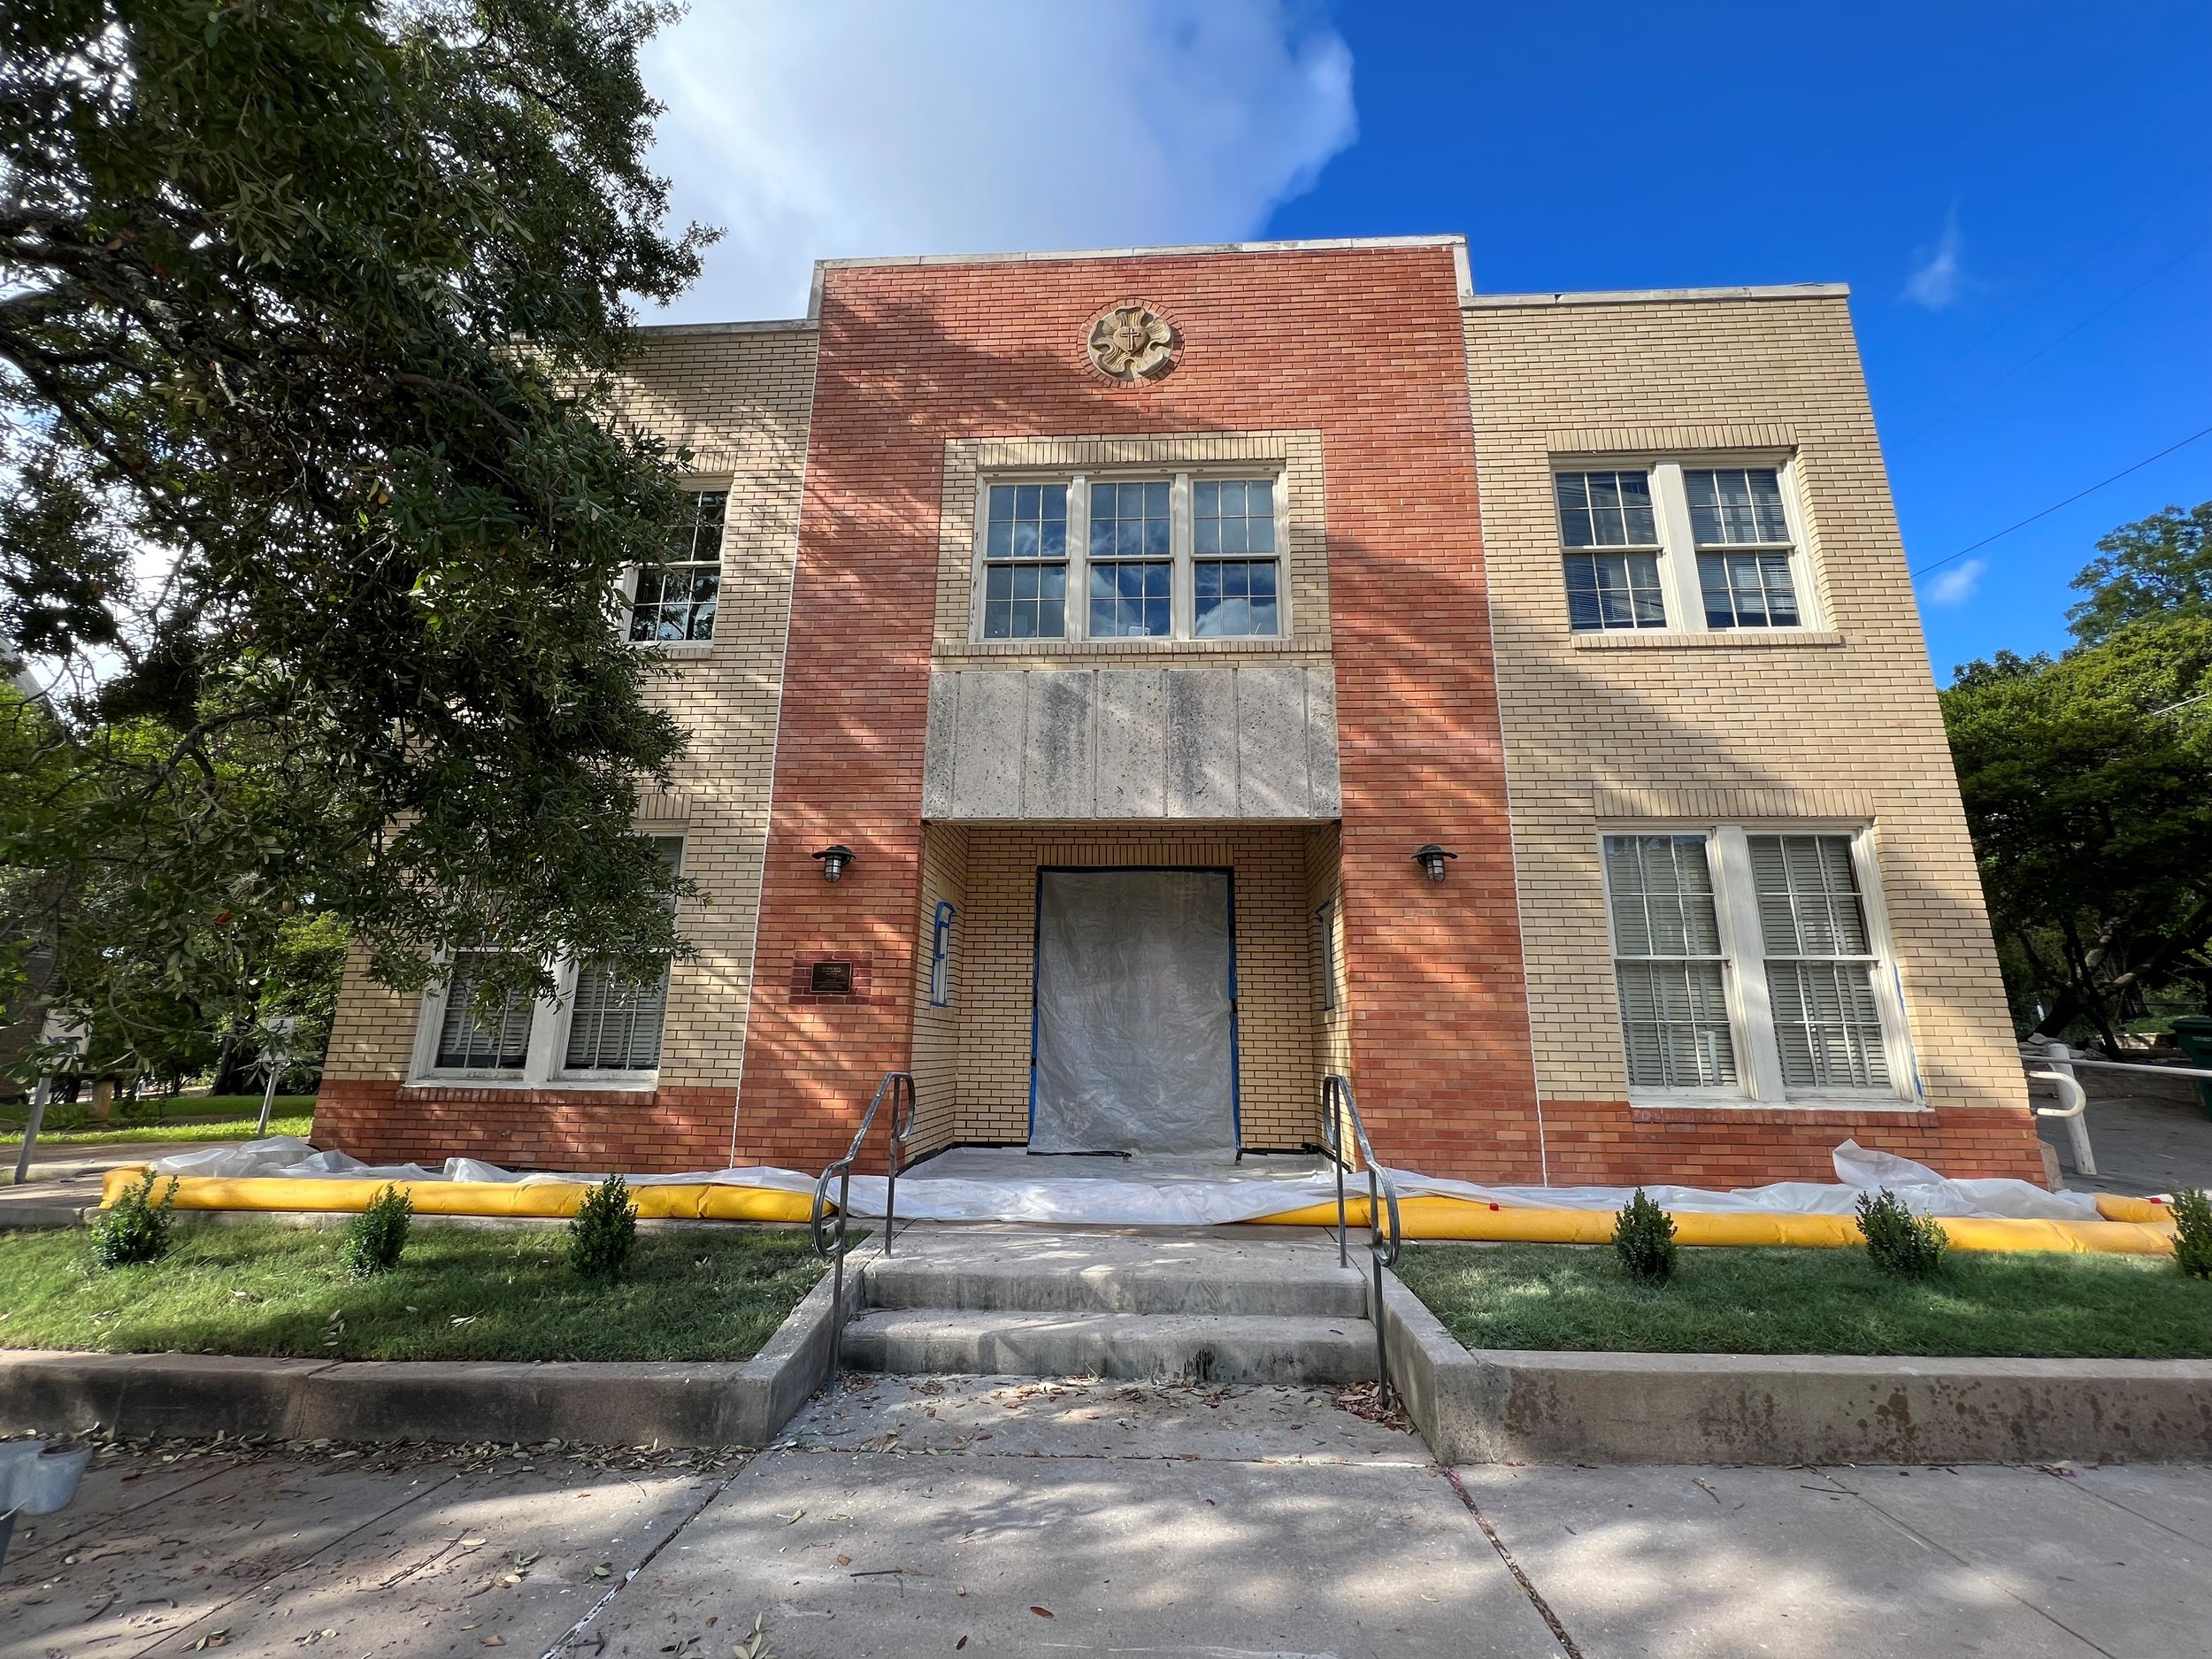   LUTHER HALL  Recipient: Texas Historical Commission  Preservation Award for Restoration    Project by Texas Historical Commission and Western Specialty Contractors   Photo: Charles Peveto 